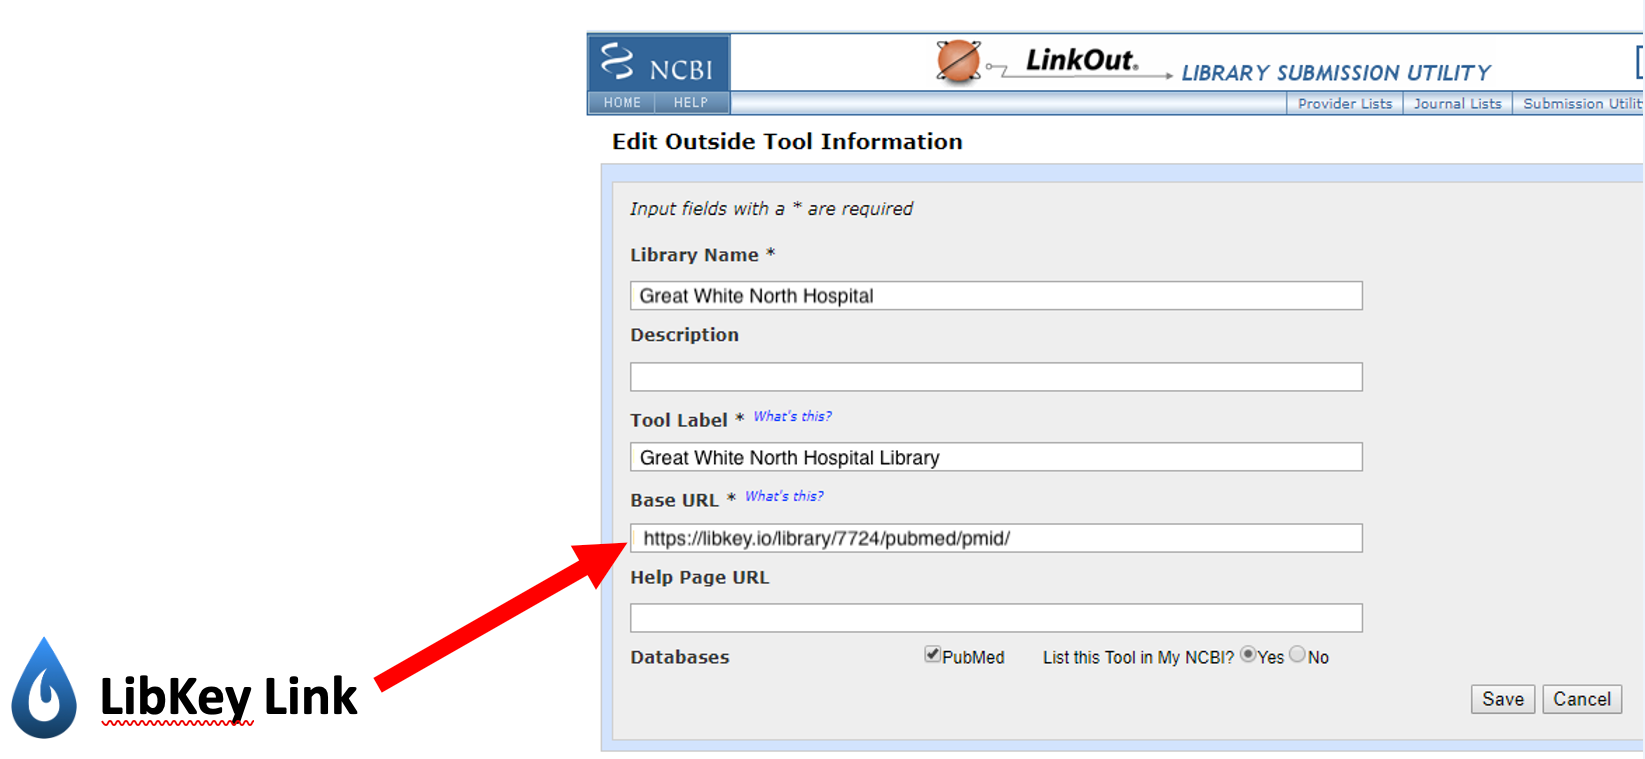 Screenshot of the PubMed Otool administrator panel "Edit Outside Tool Information", showing the LibKey link entered in the Base URL field.